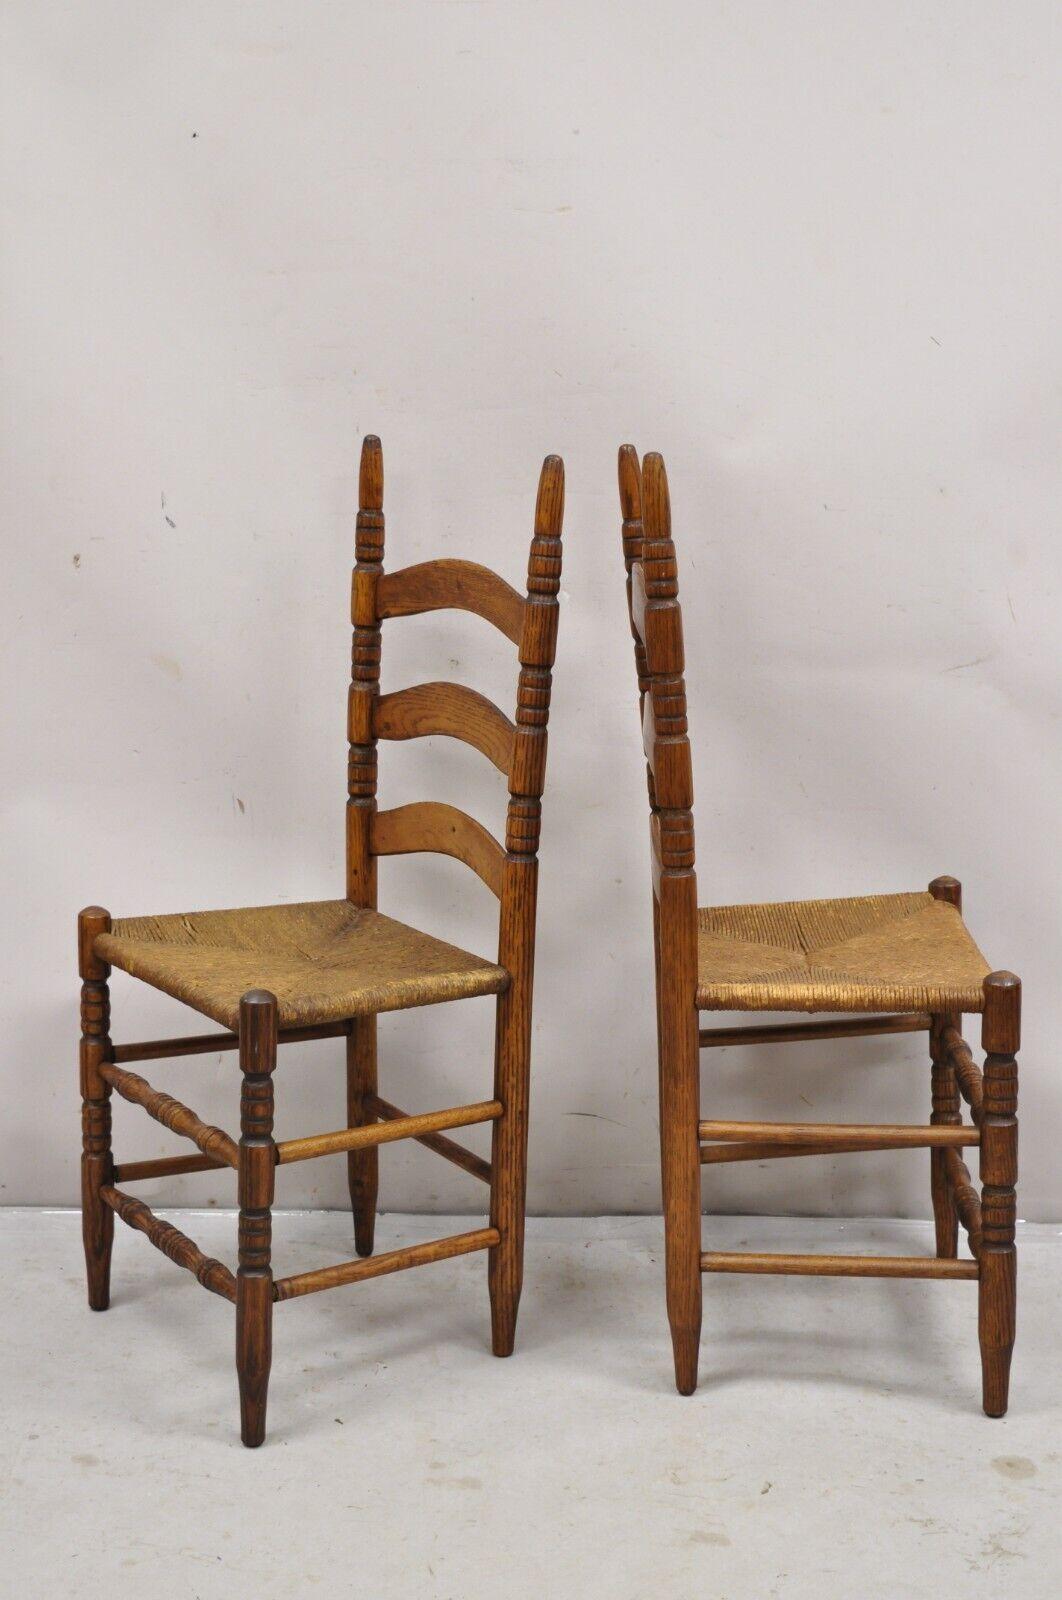 Antique Ladderback Primitive Rustic Oak Wood Rush Seat Dining Chairs - Set of 4 For Sale 3